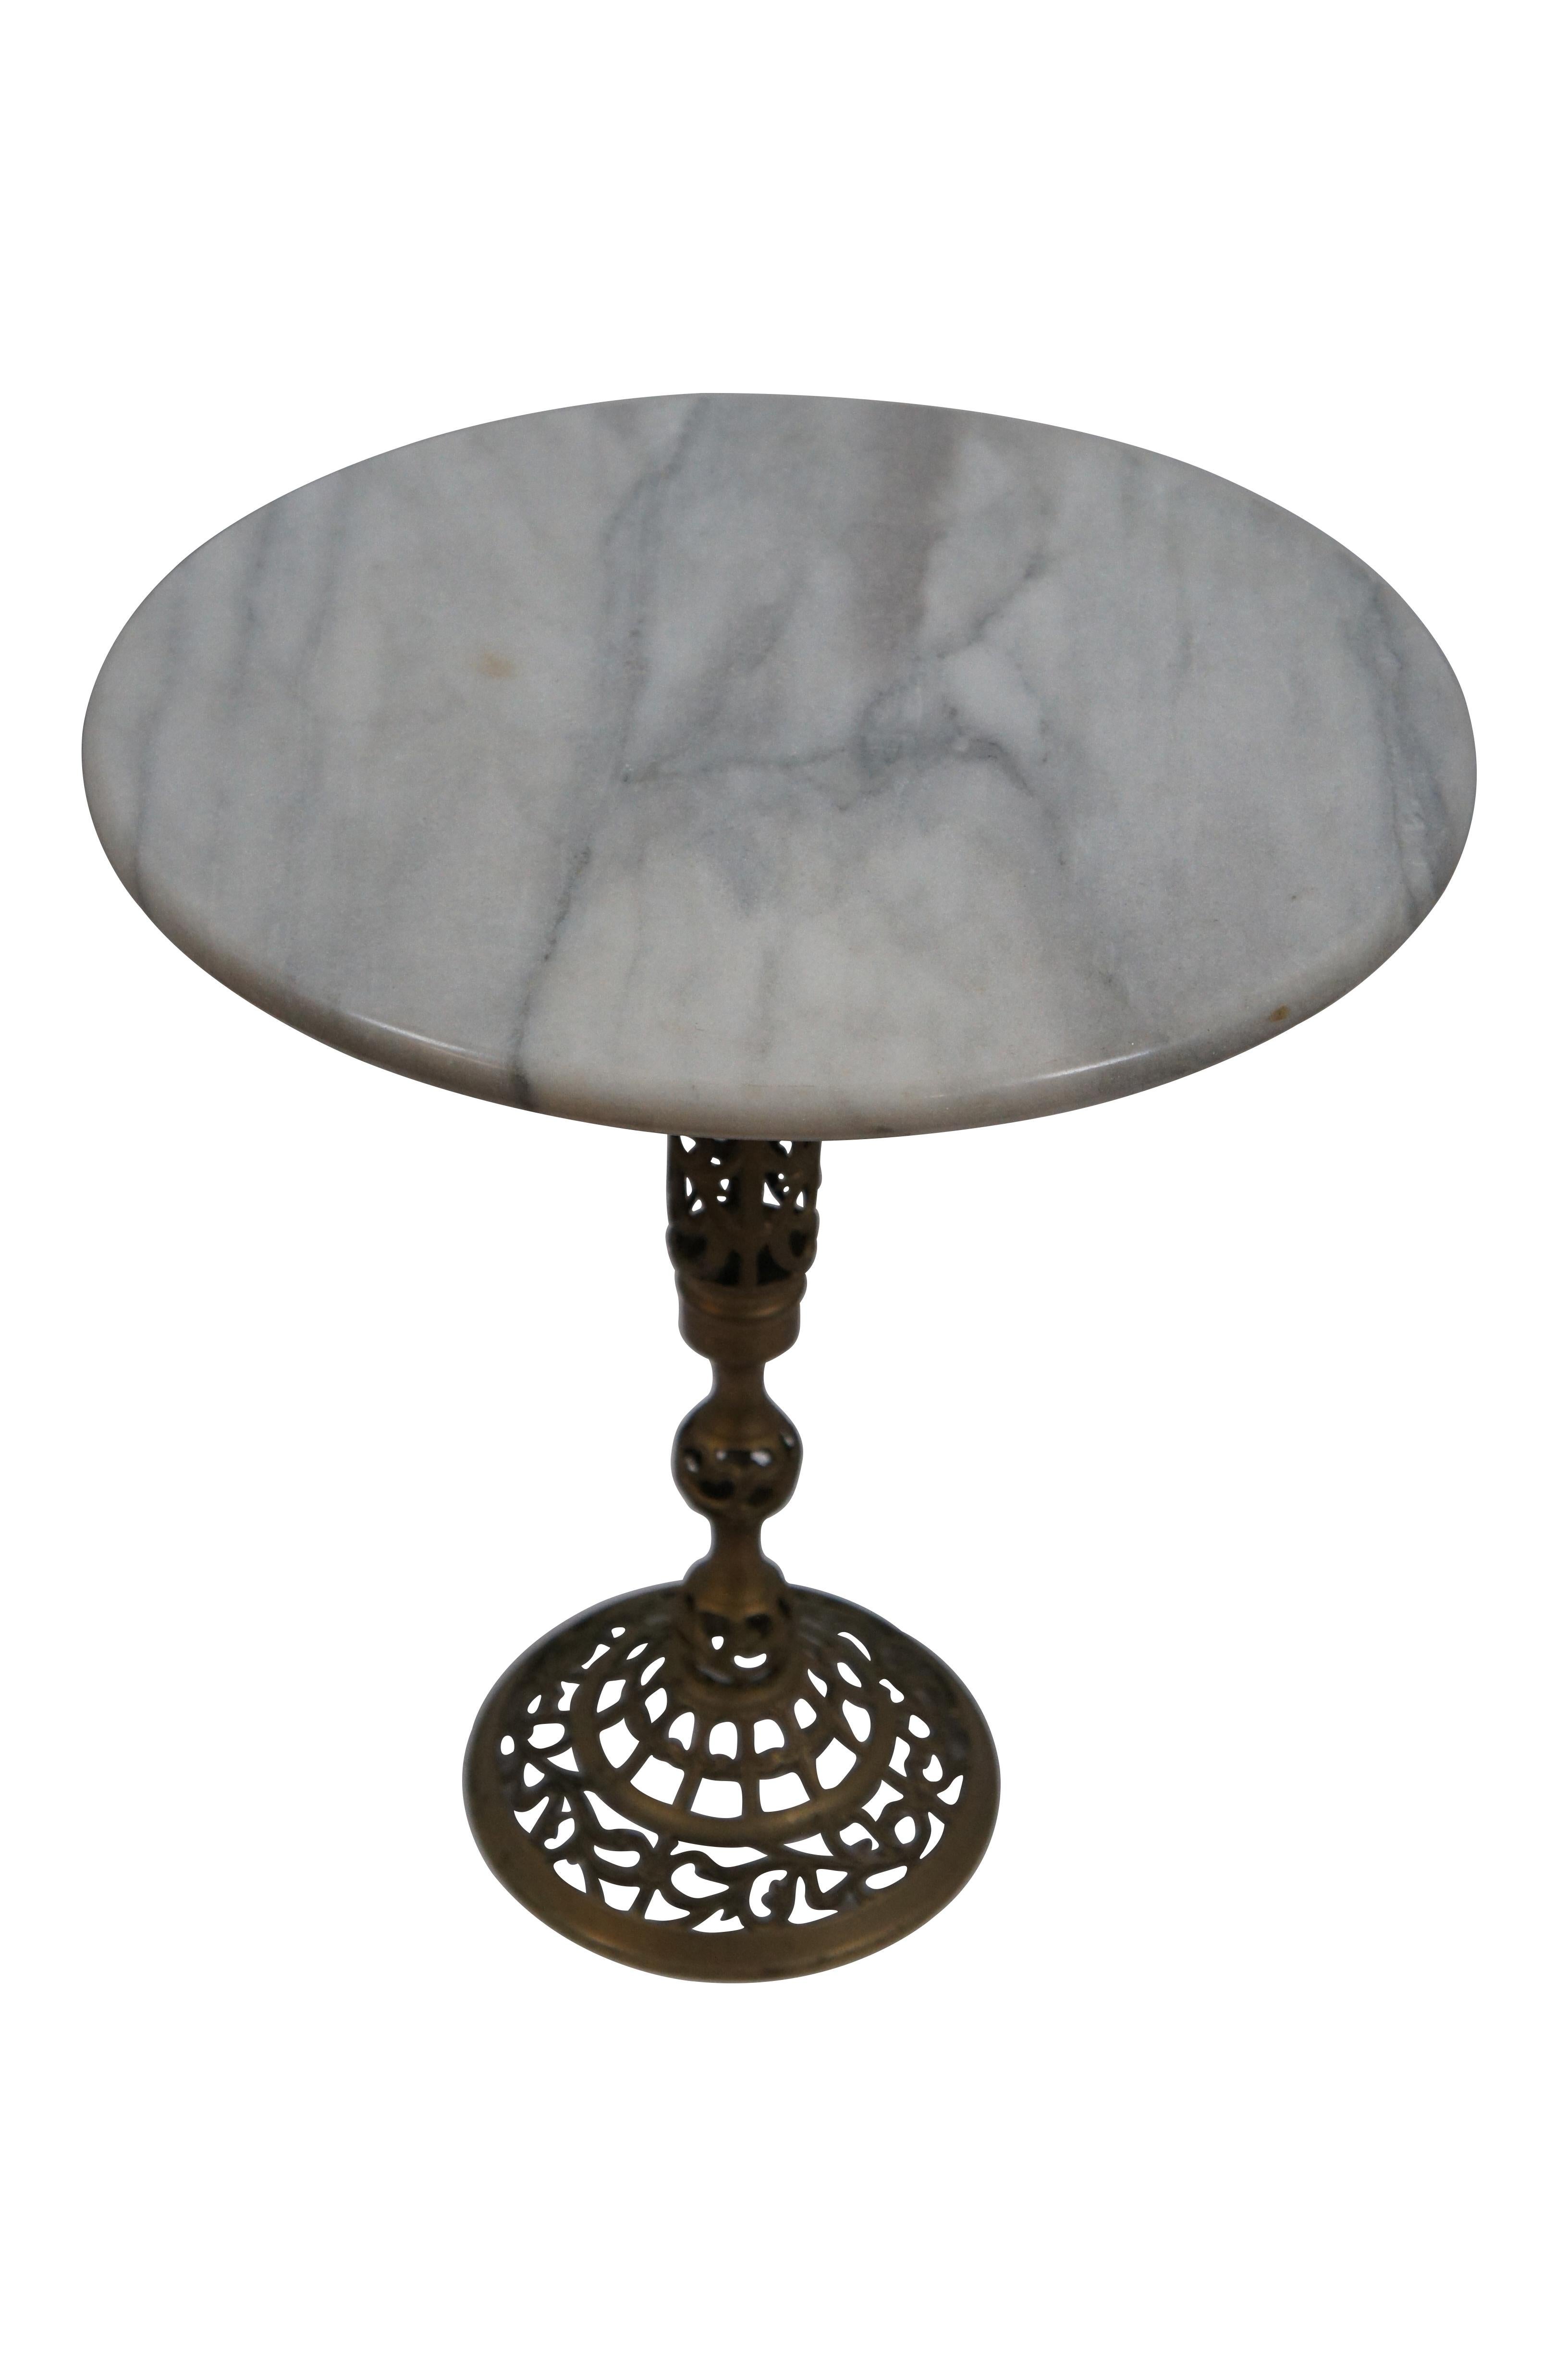 Vintage Hollywood Regency plant stand / end table with a round white and gray veined marble top, perched on an elegant pierced / open brass work base featuring a lattice of foliate leaves. Made in Taiwan R.O.C. Item number 004.


DIMENSIONS

15.25”